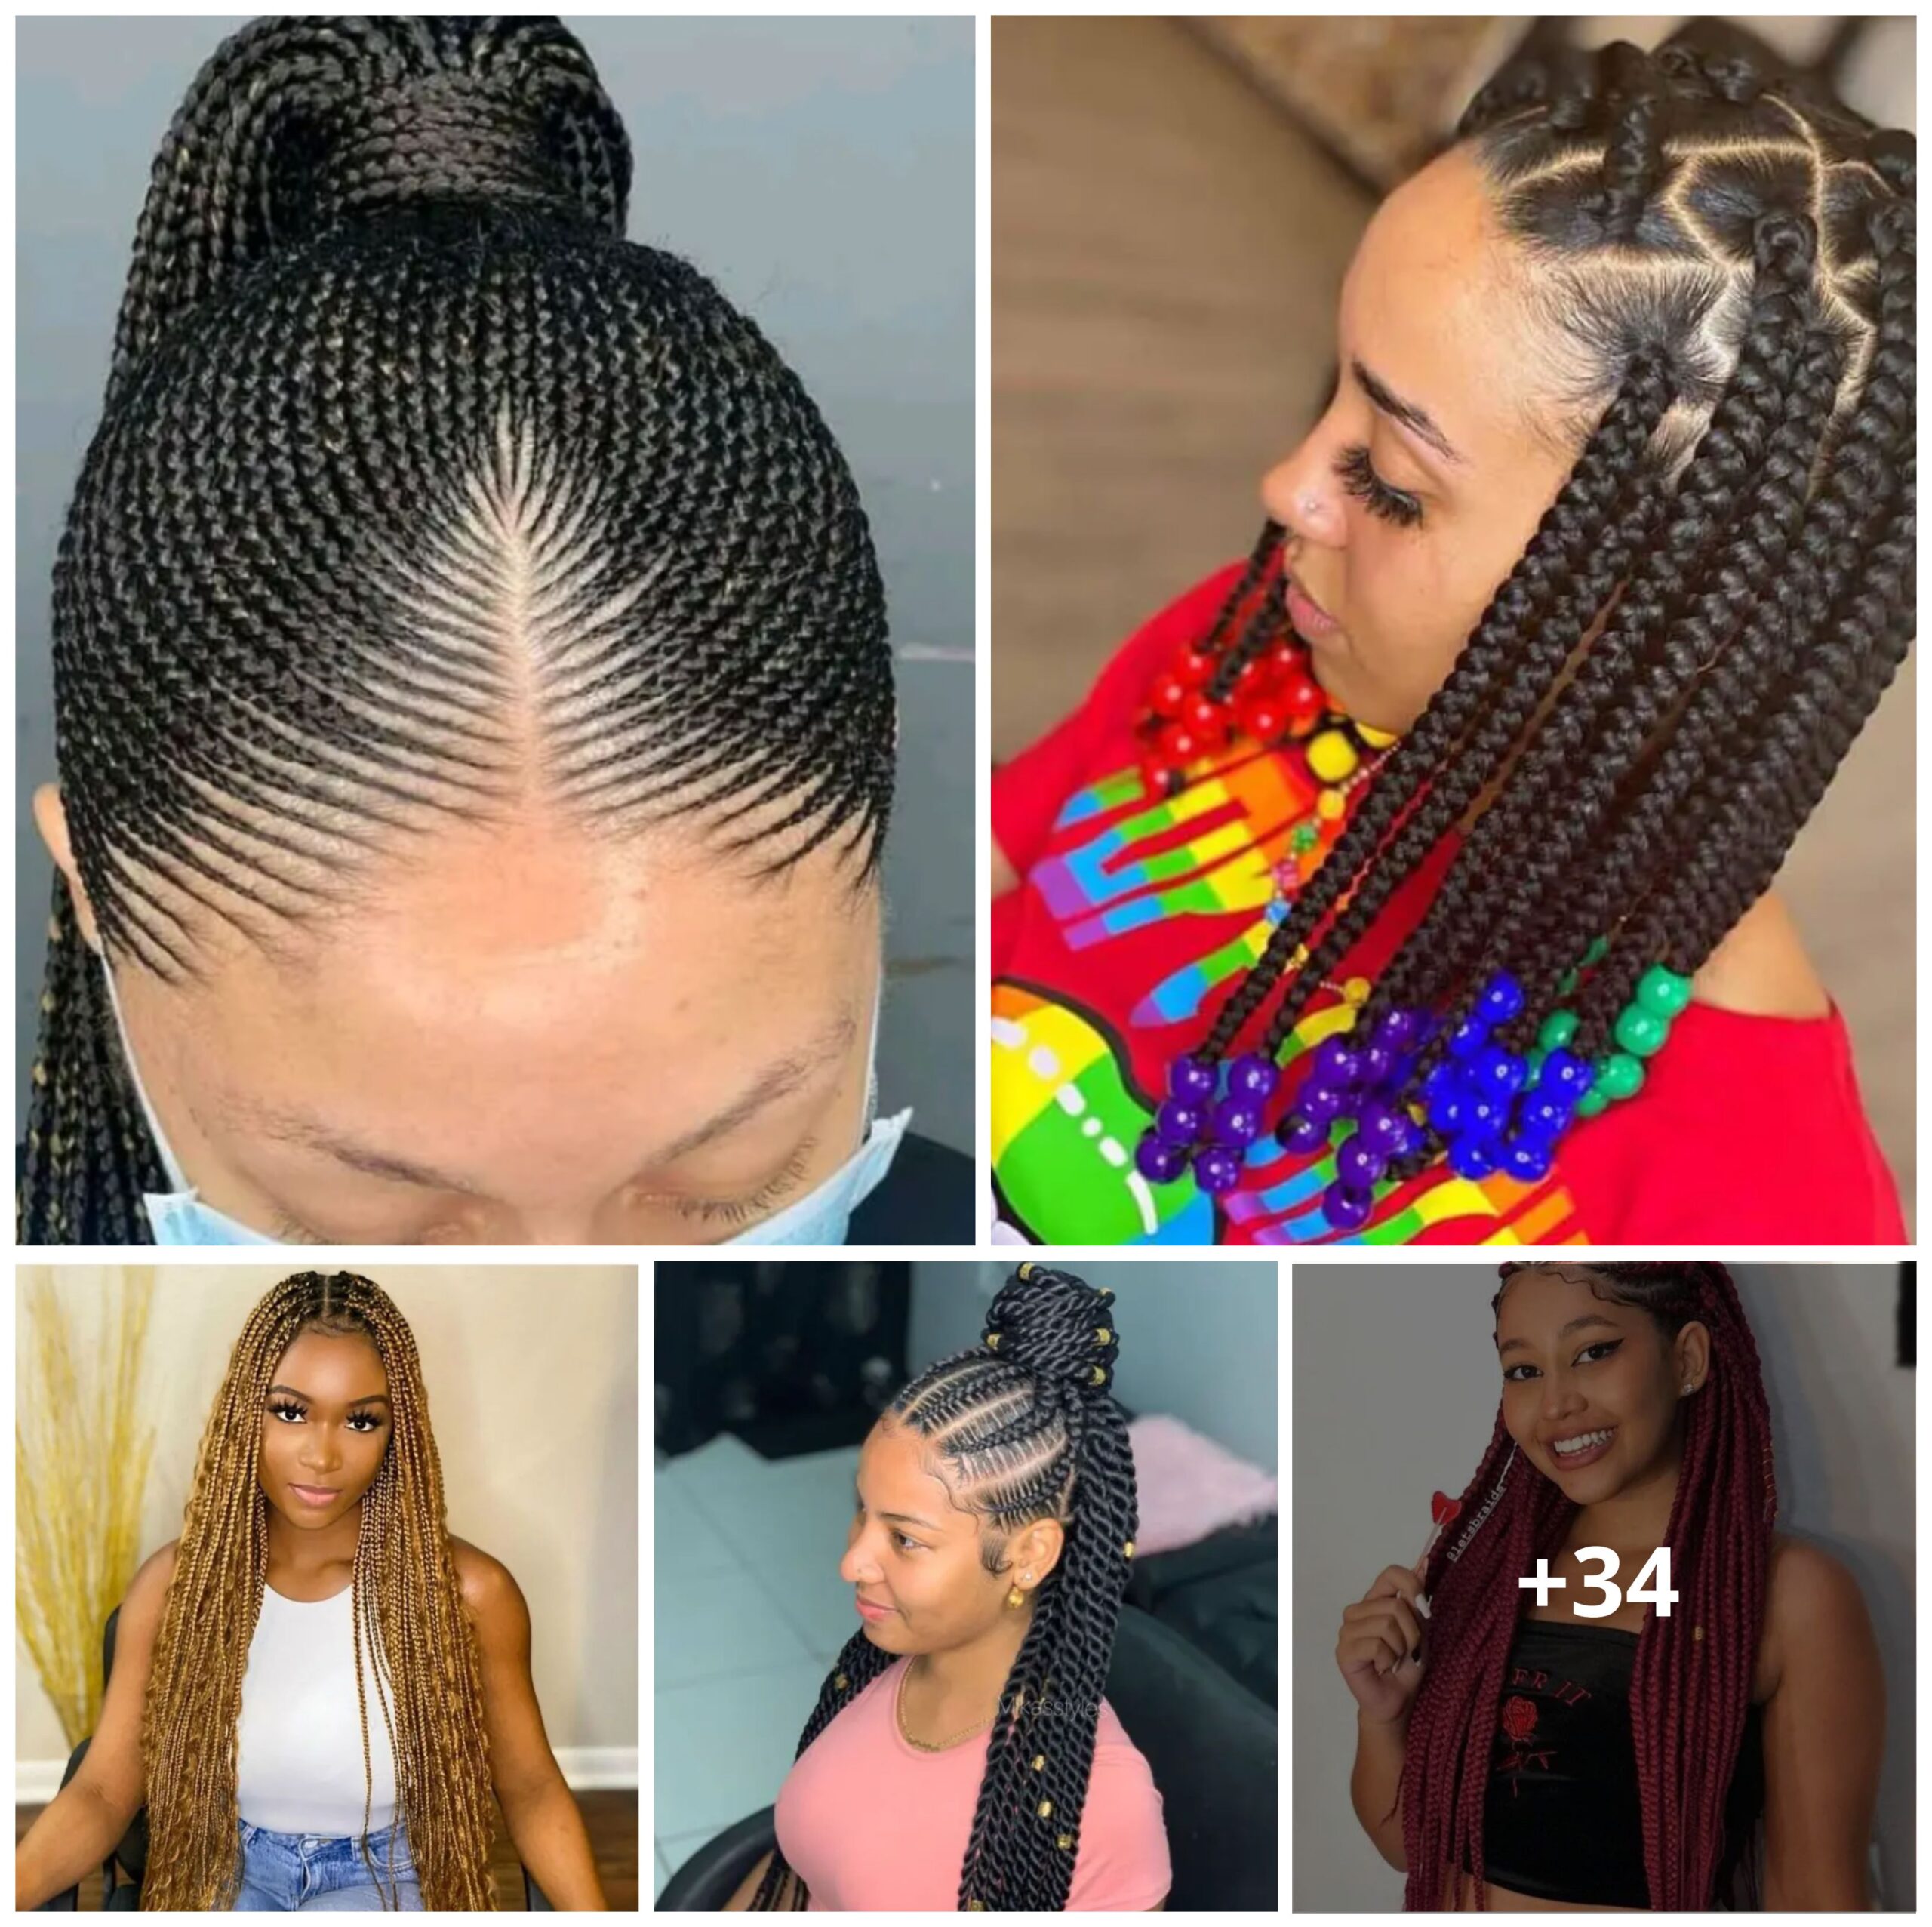 Hairstyles To Spice Up Your Facial Appearance (Photos)